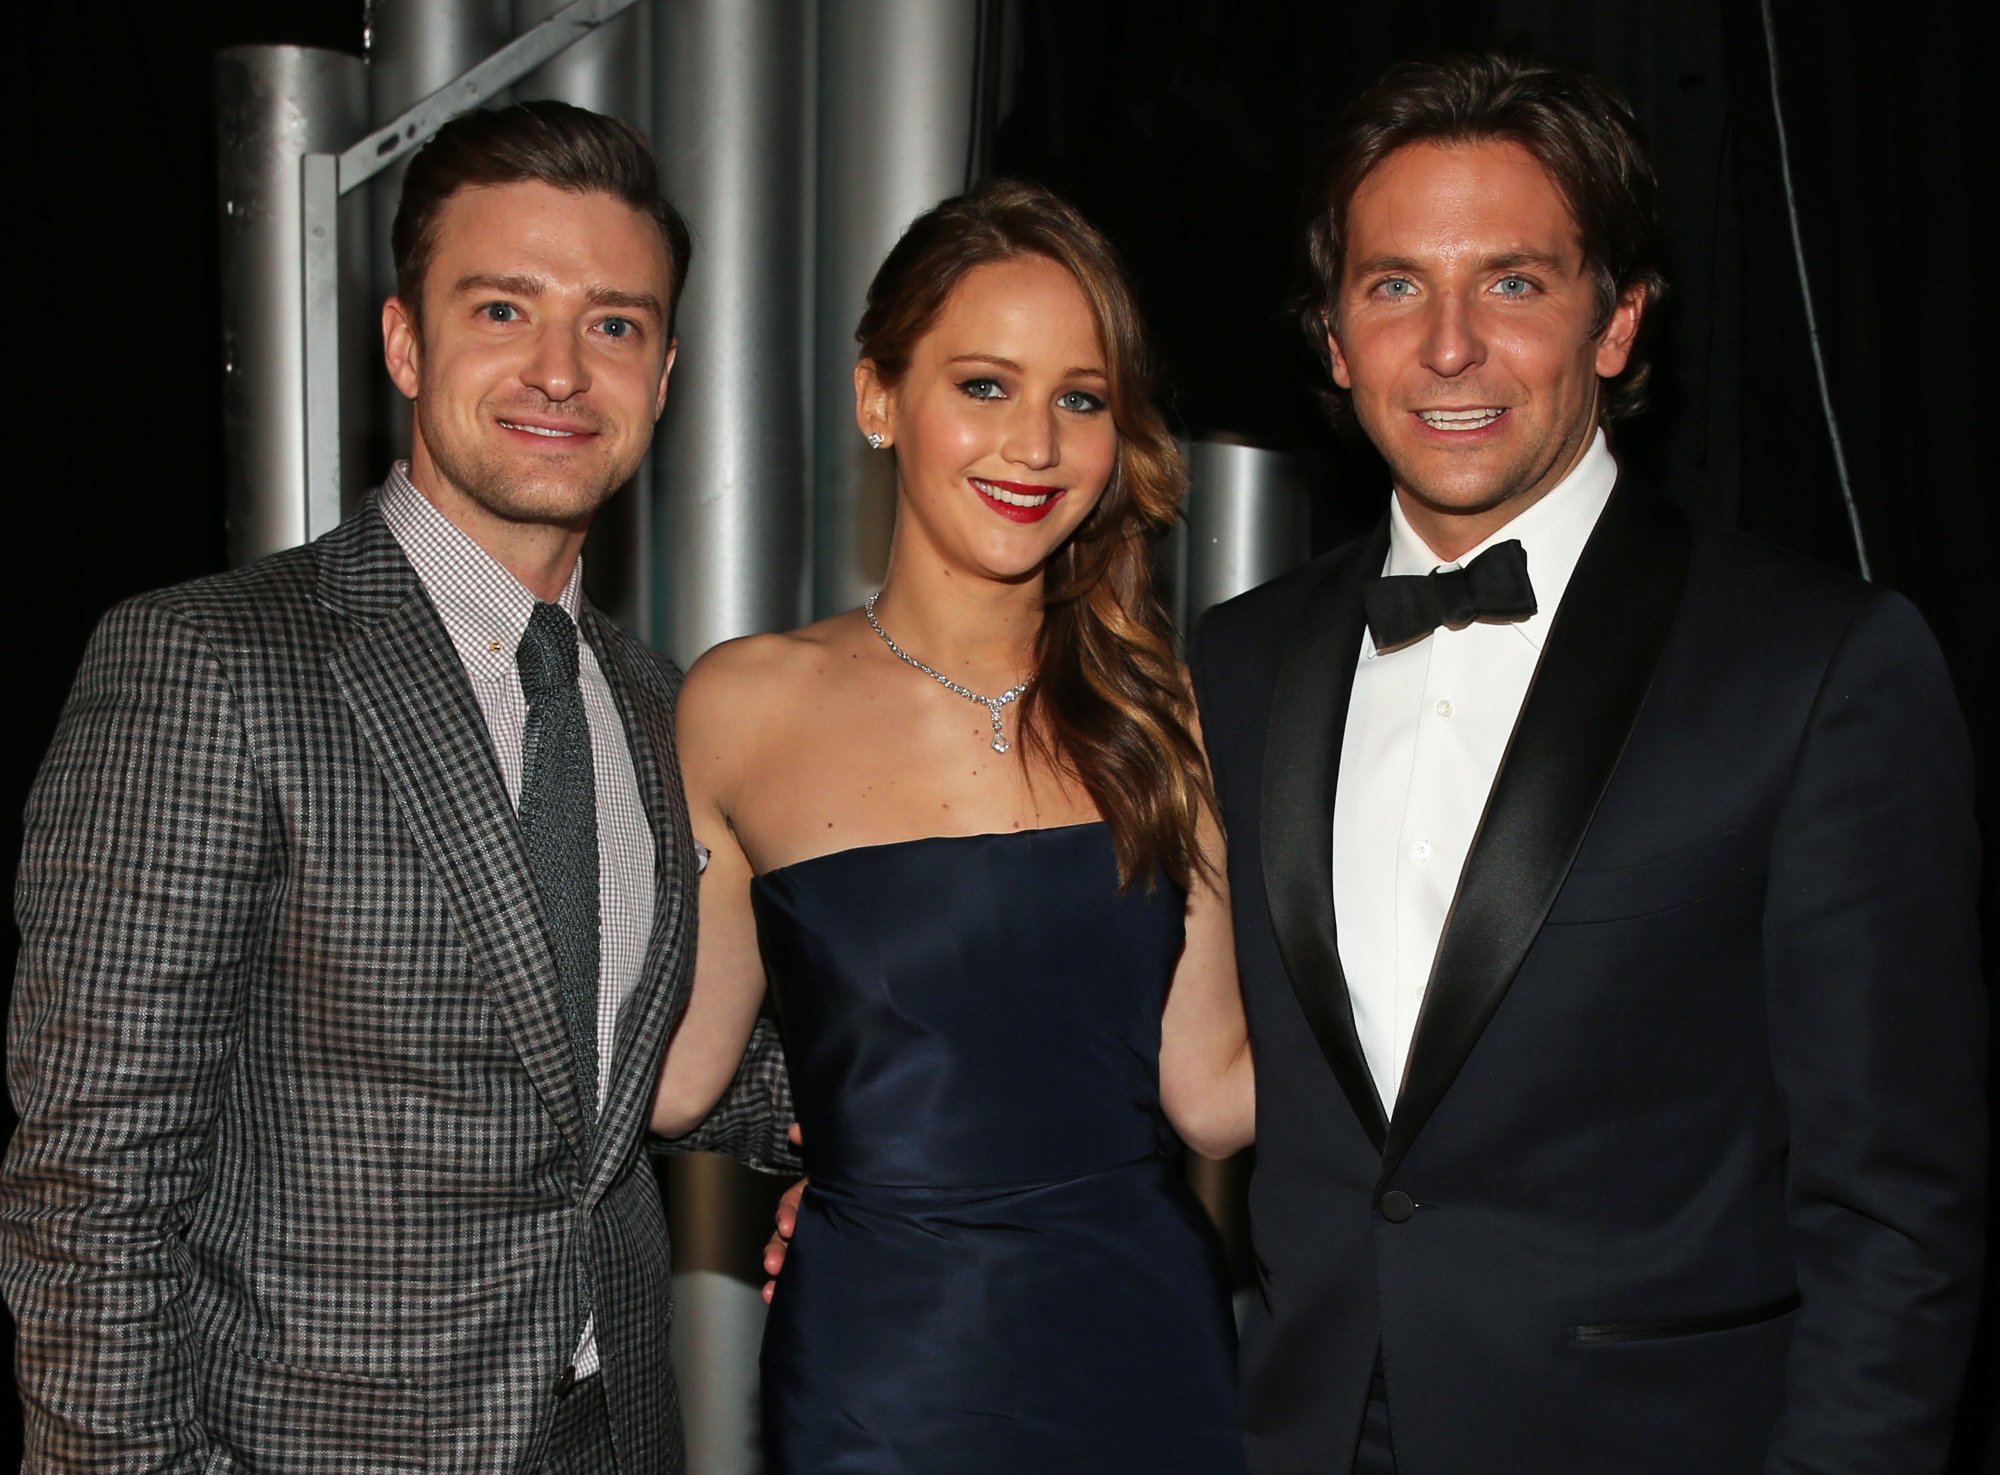 Justin Timberlake, Jennifer Lawrence, and Bradley Cooper with Lawrence's arms behind Timberlake and Cooper